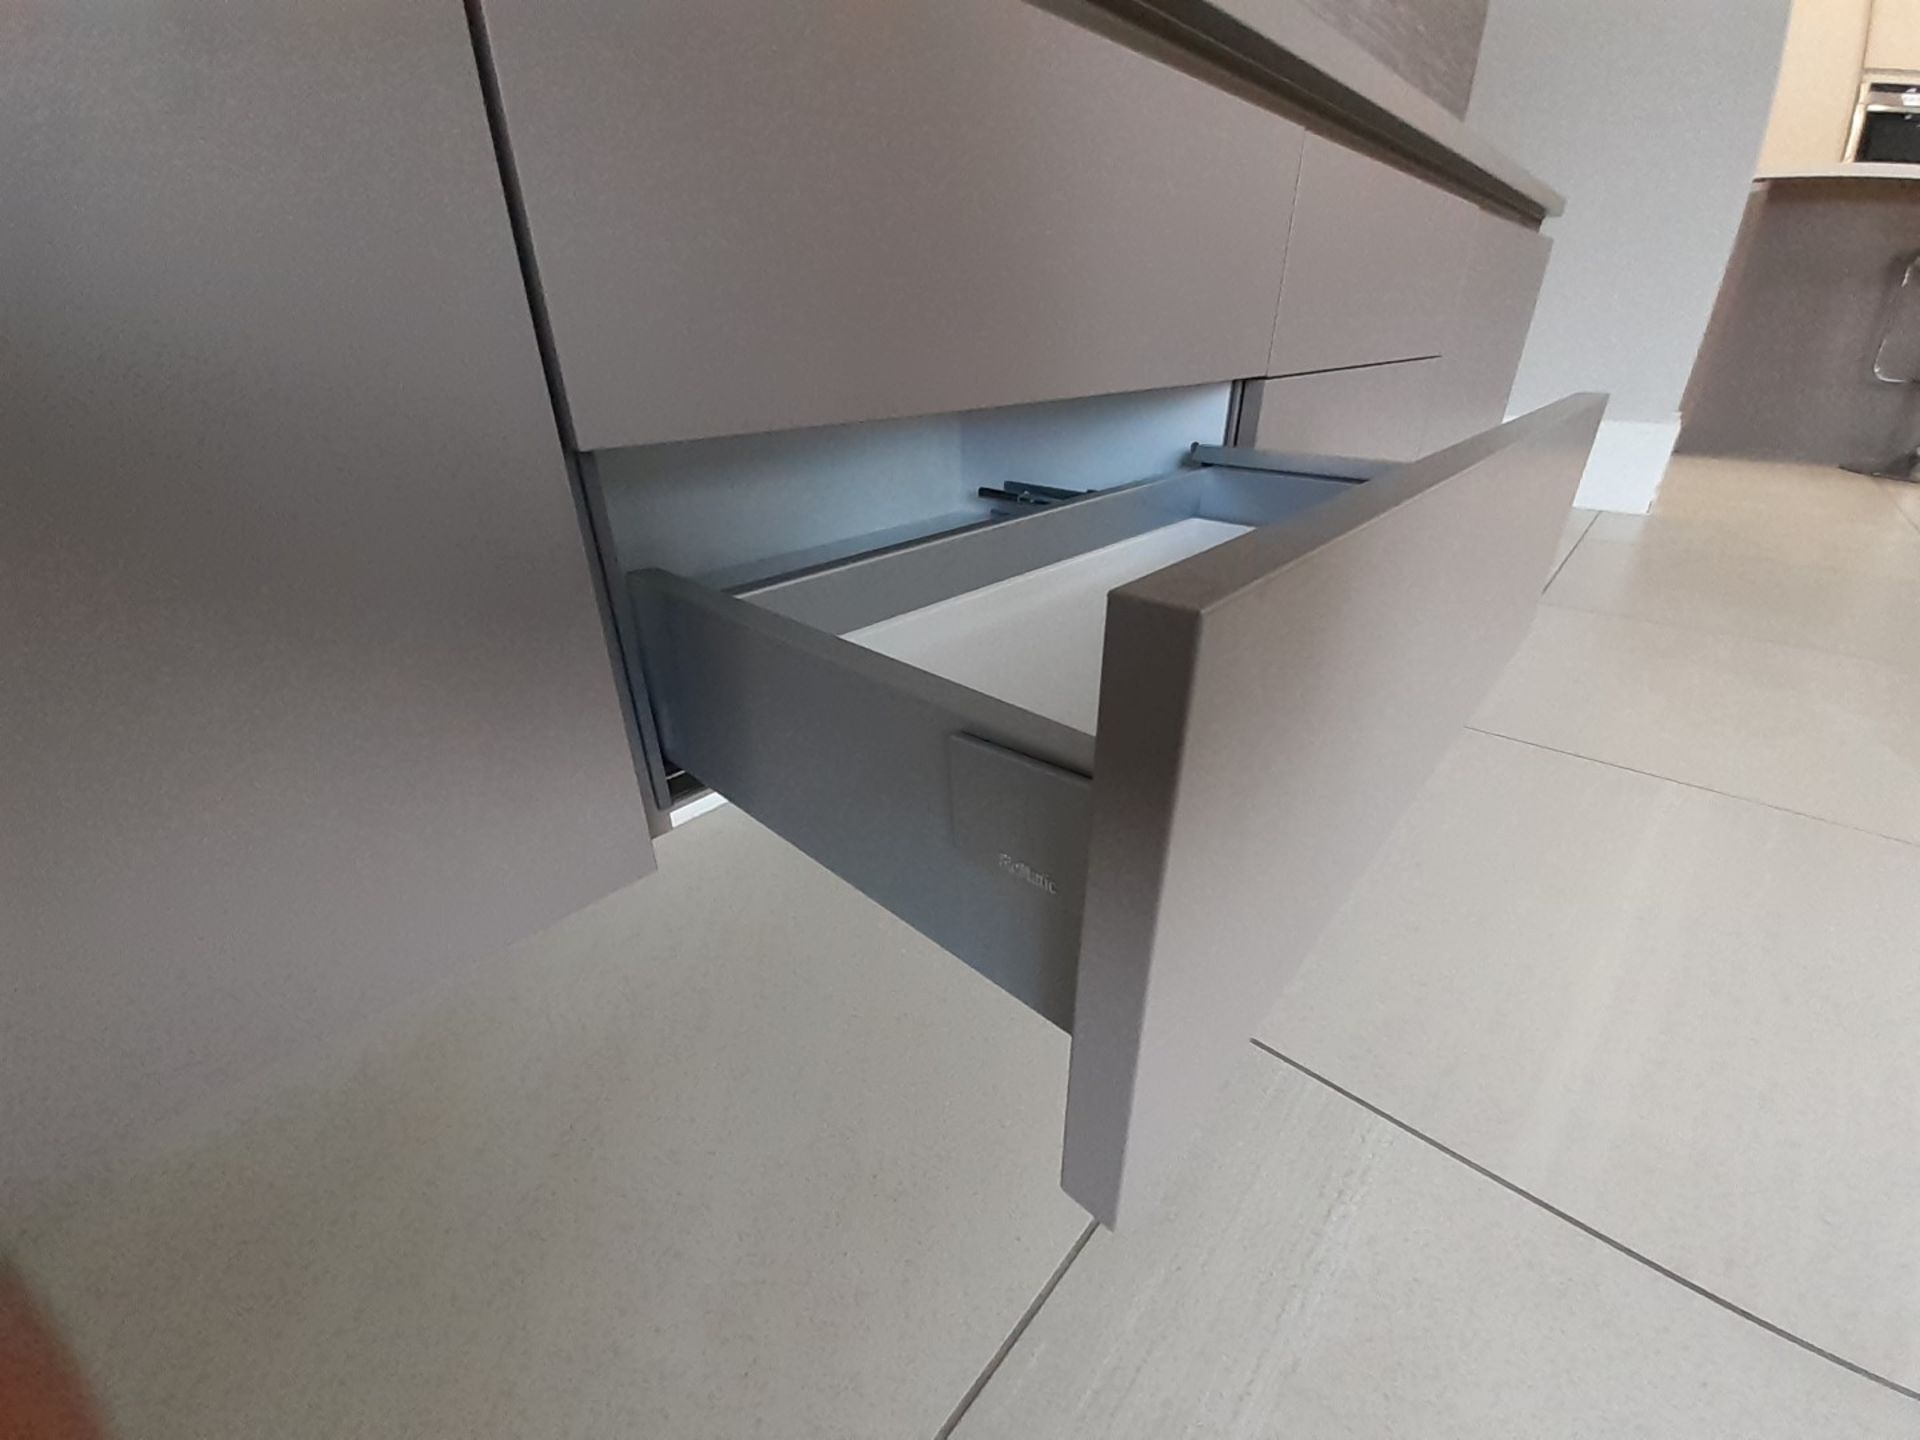 1 x SieMatic Handleless Fitted Kitchen With Intergrated NEFF Appliances, Corian Worktops And Island - Image 83 of 92